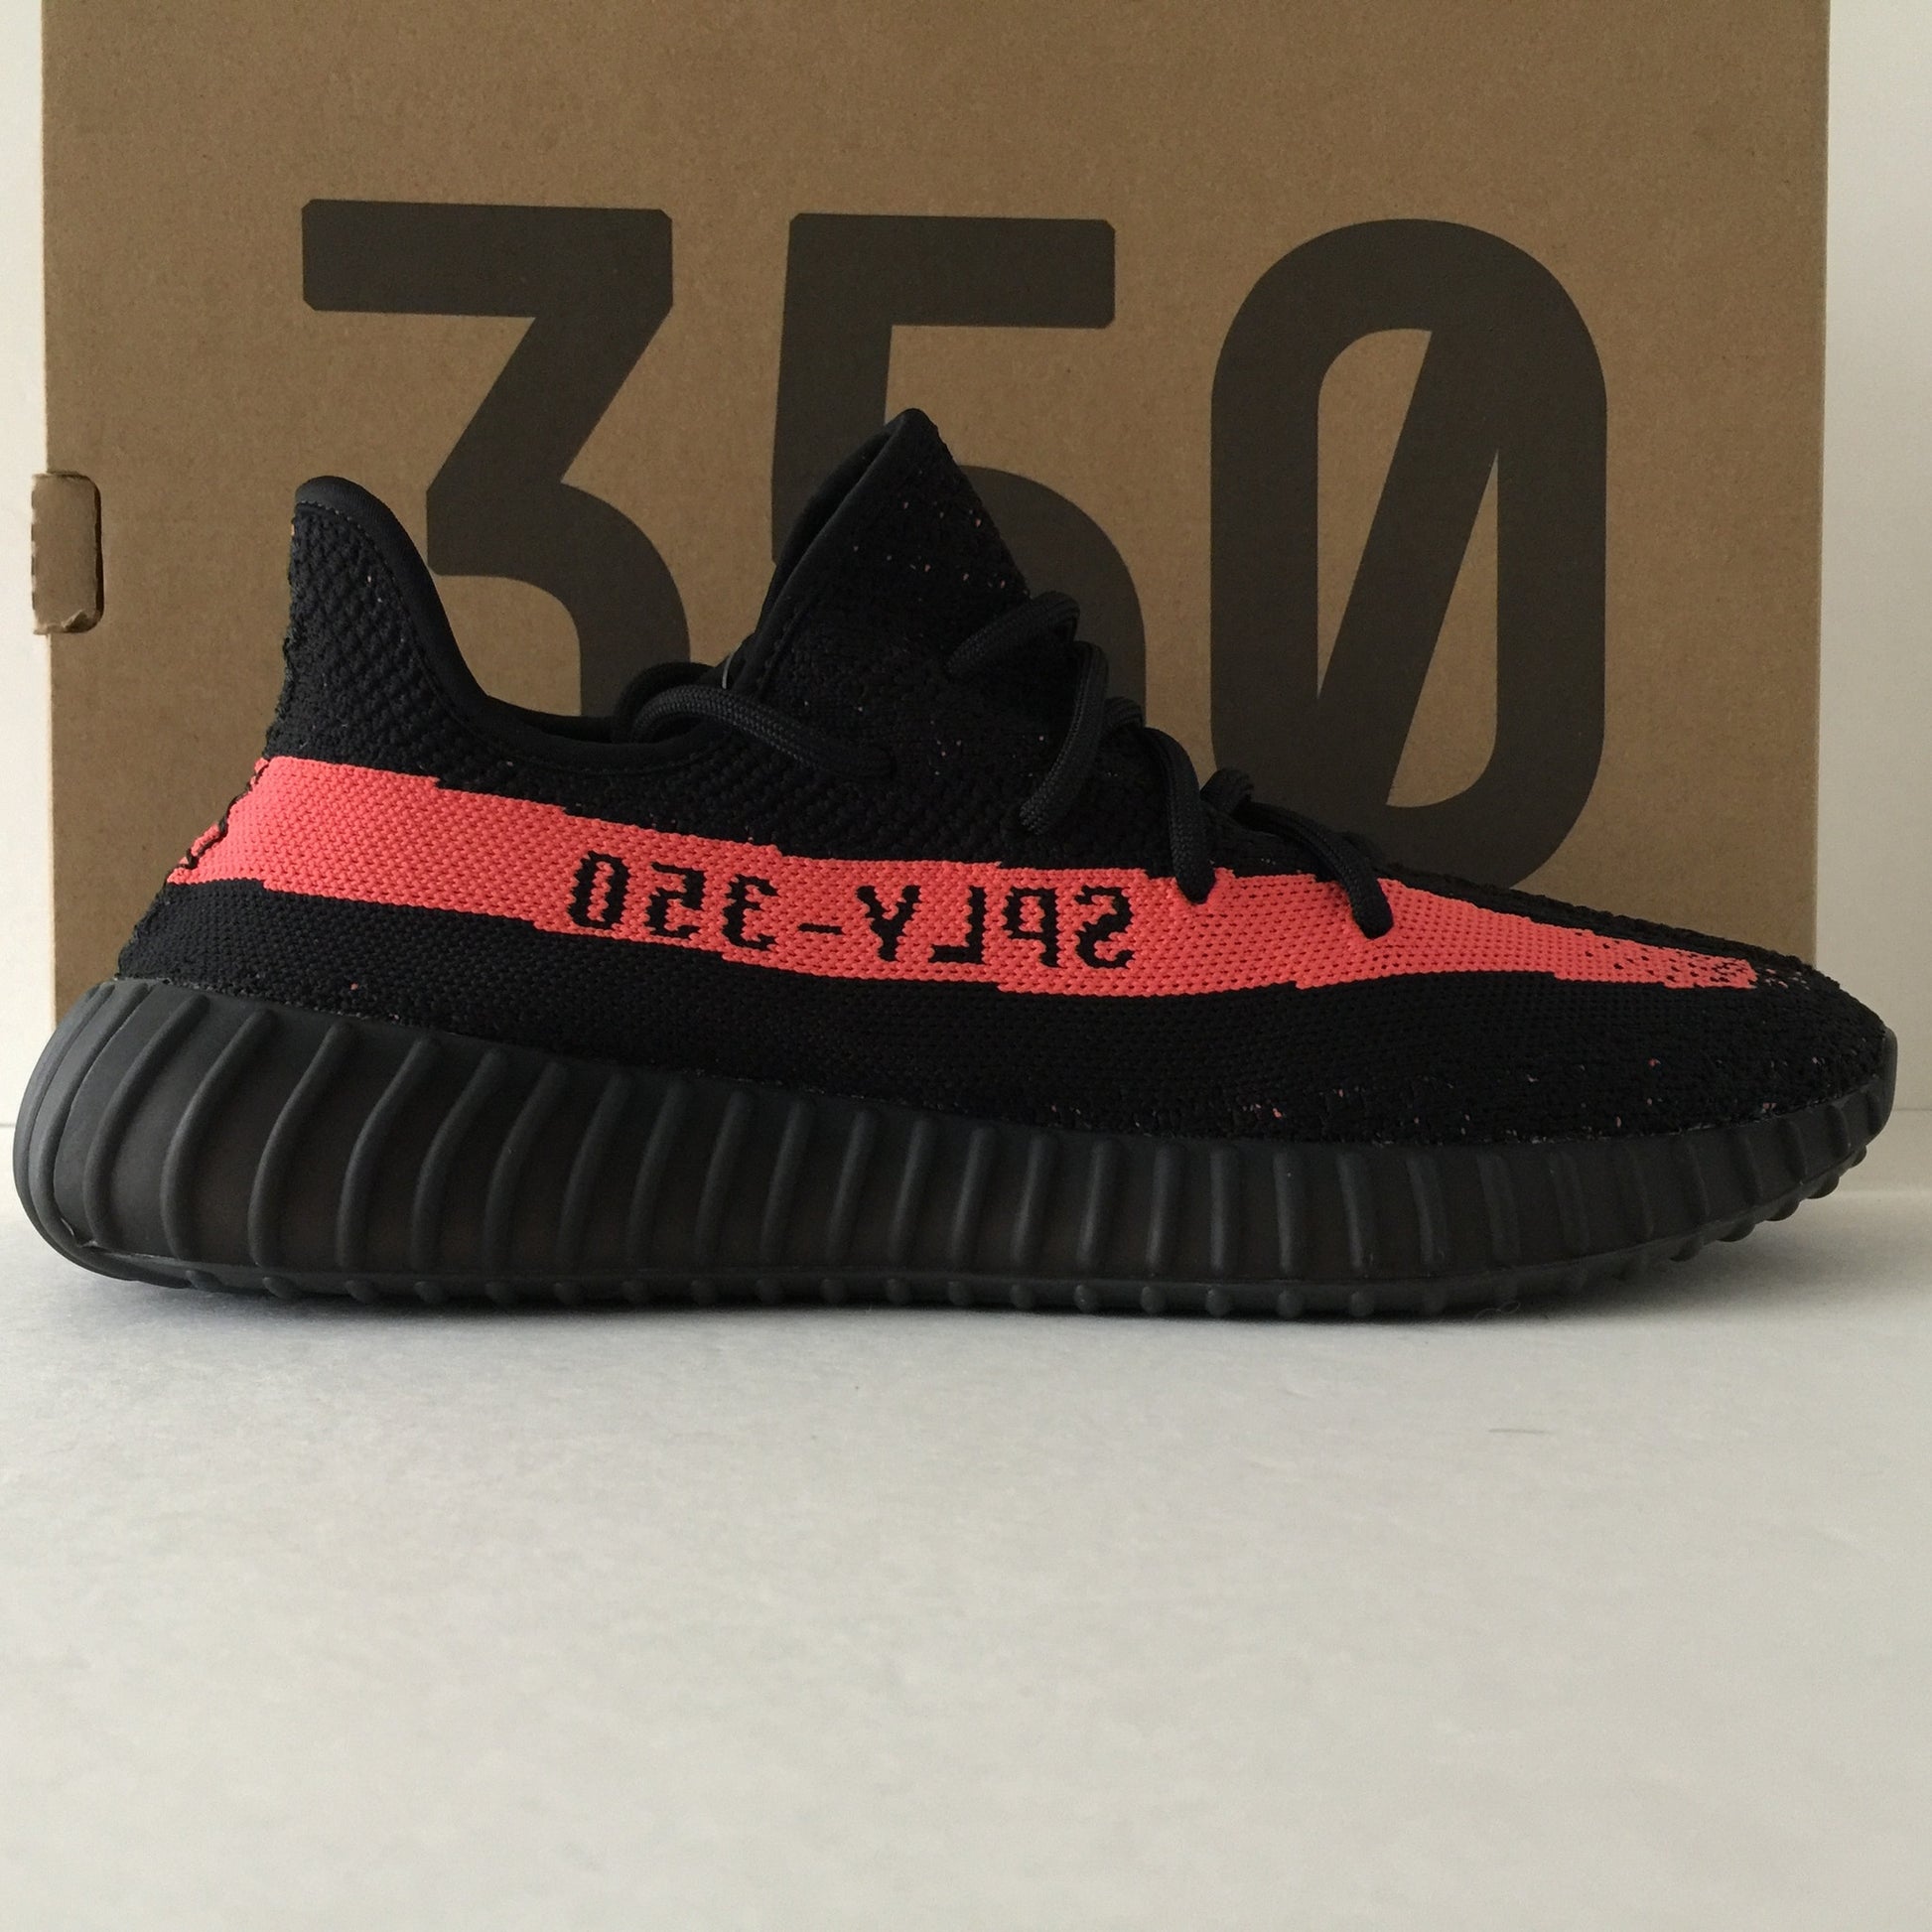 DS Adidas Yeezy Boost 350 V2 Solar Red Size 9.5 - DOPEFOOT
 - 1